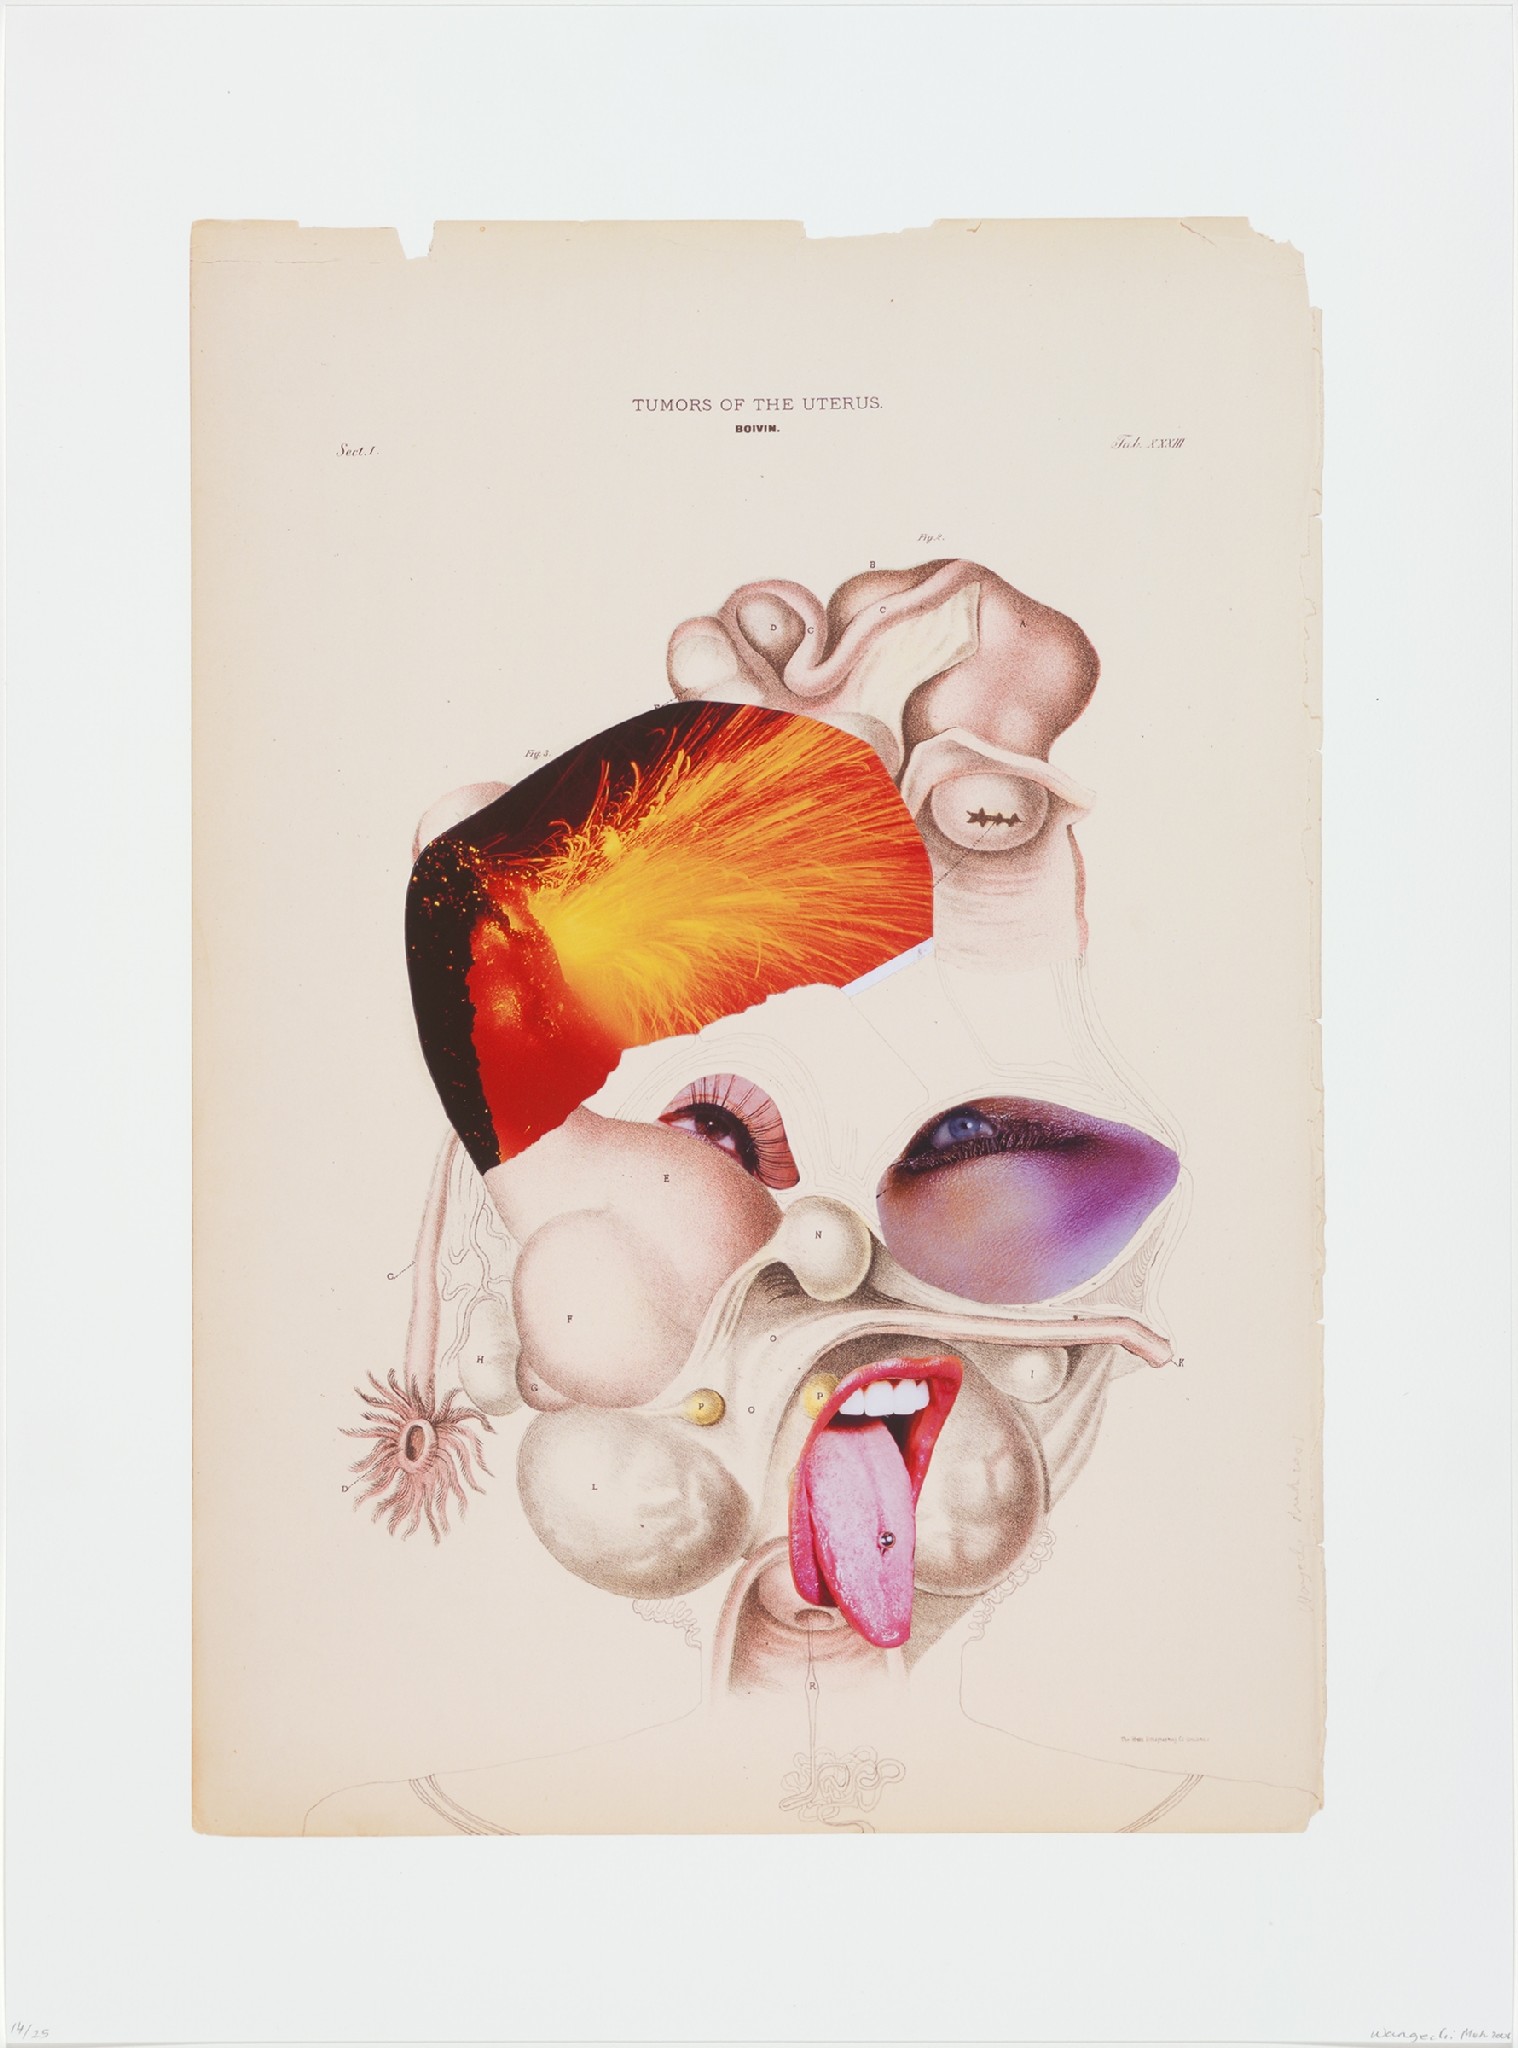 A collage shows a face that is created from various separate images showing facial features, internal organs, and ambiguous elements. Most evident are two eyes and a mouth with its tongue sticking out that are pasted atop a medical illustration.